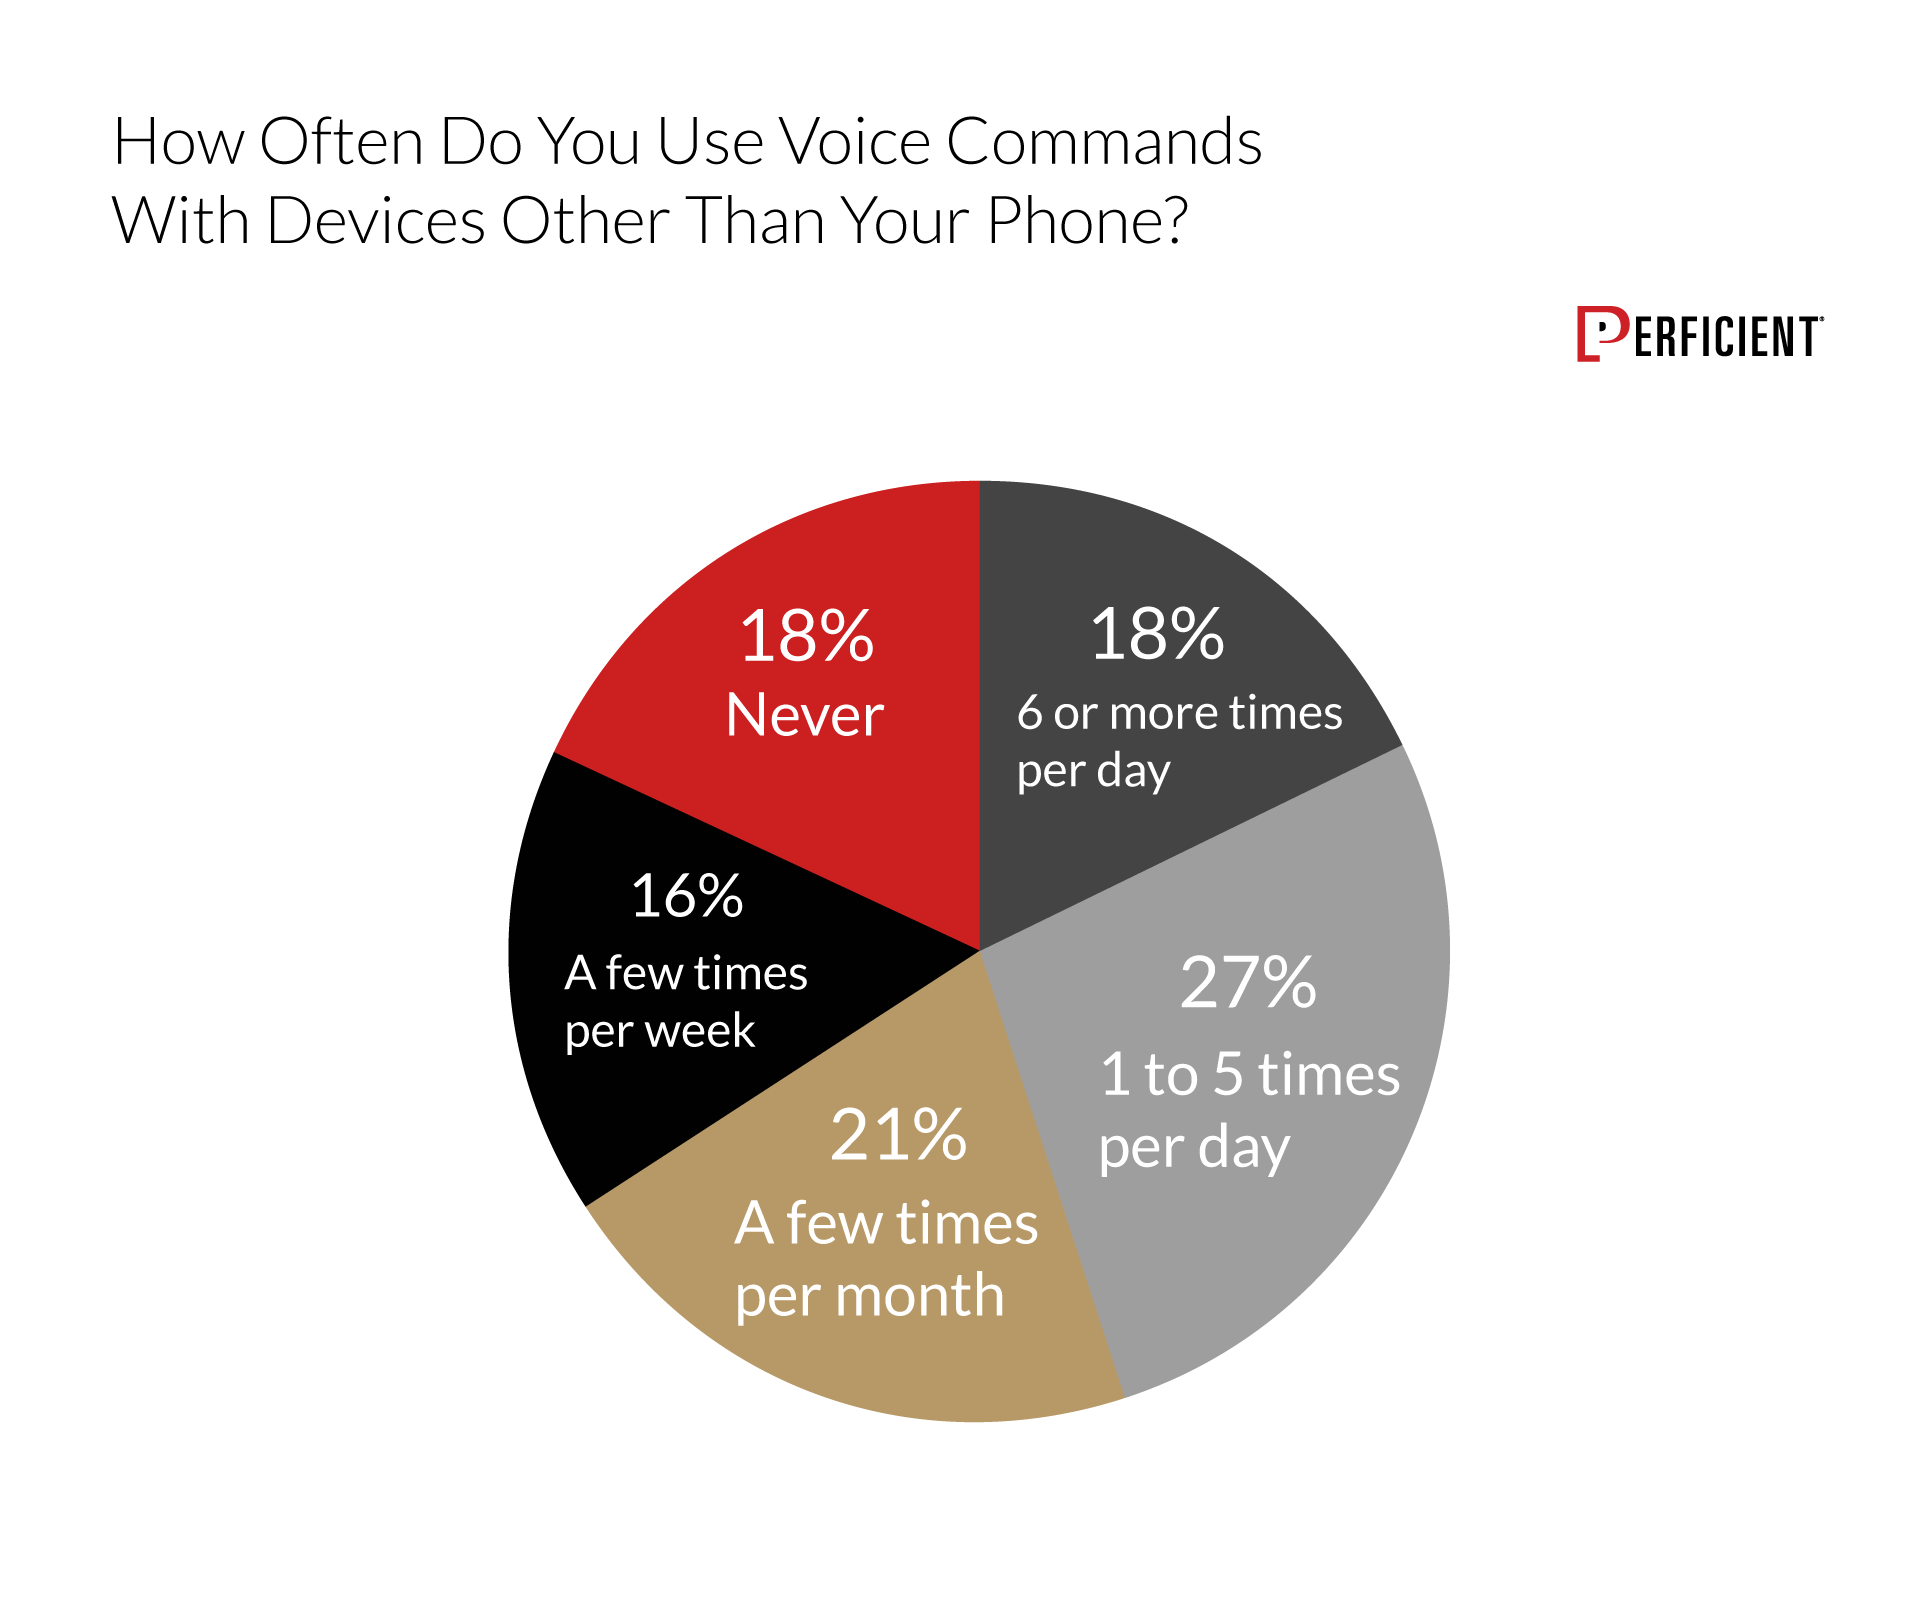 Chart shows how often people use voice commands with devices other than their phones